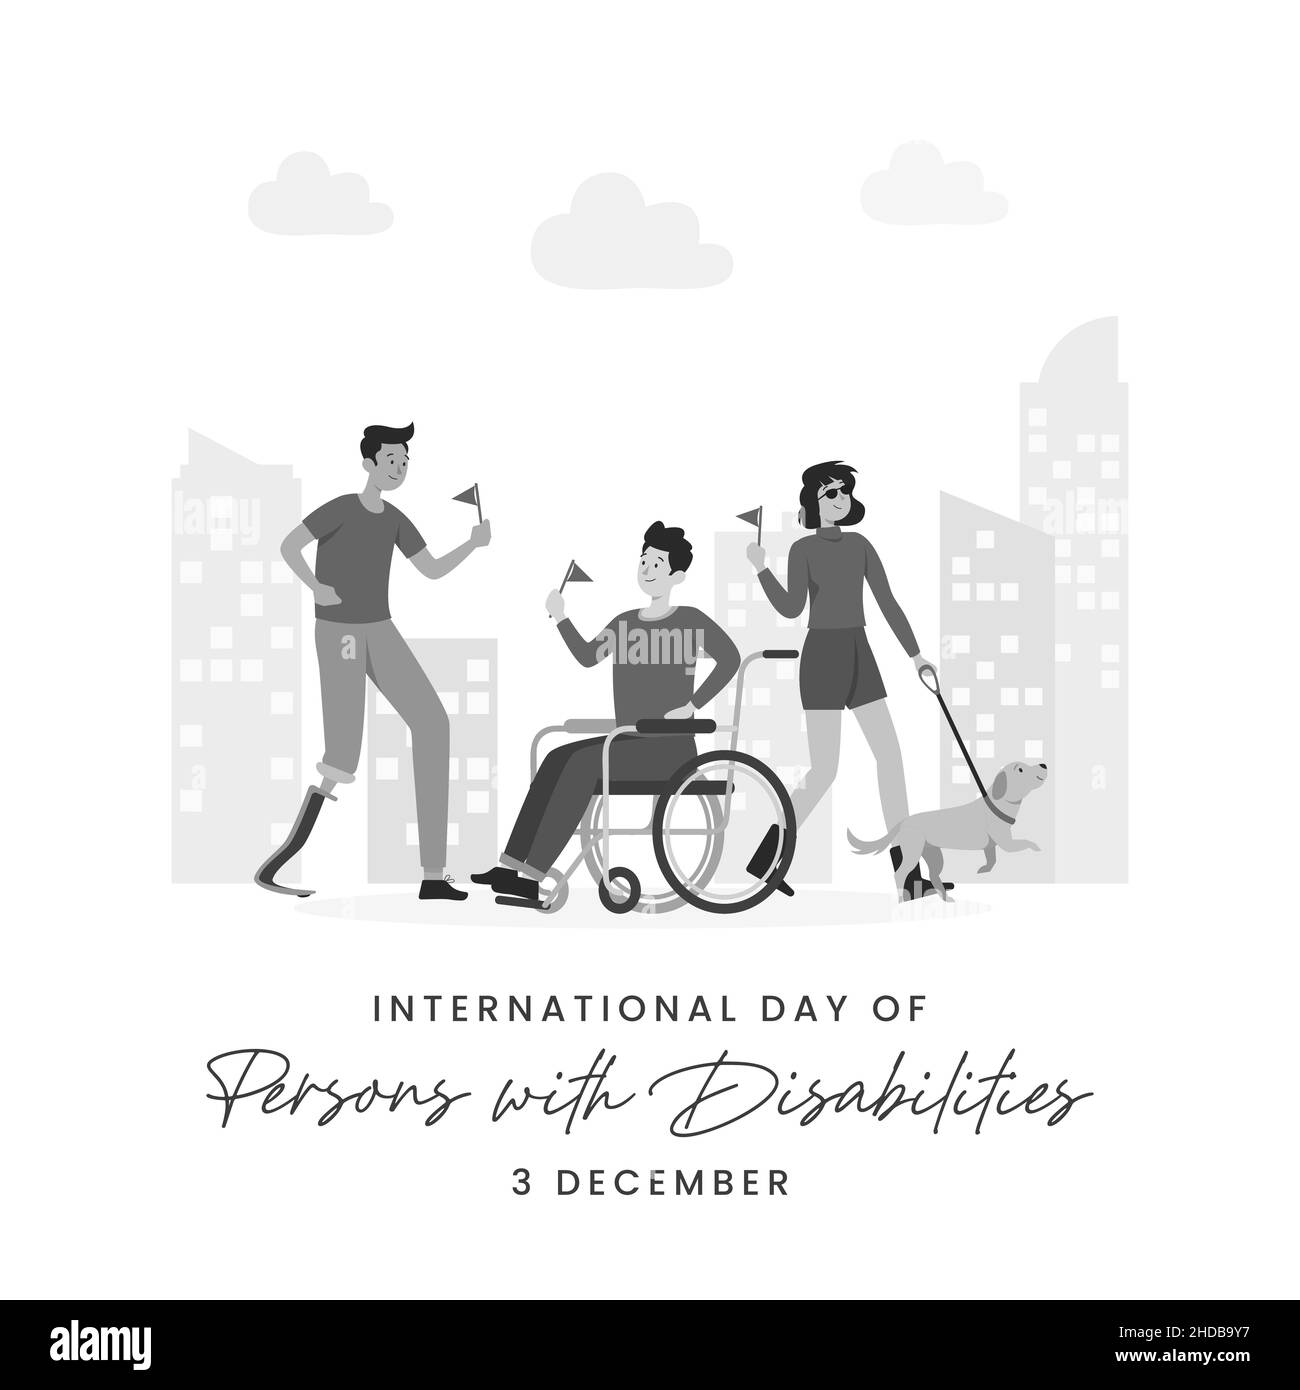 International day of persons with disabilities. December 3. Stock Vector